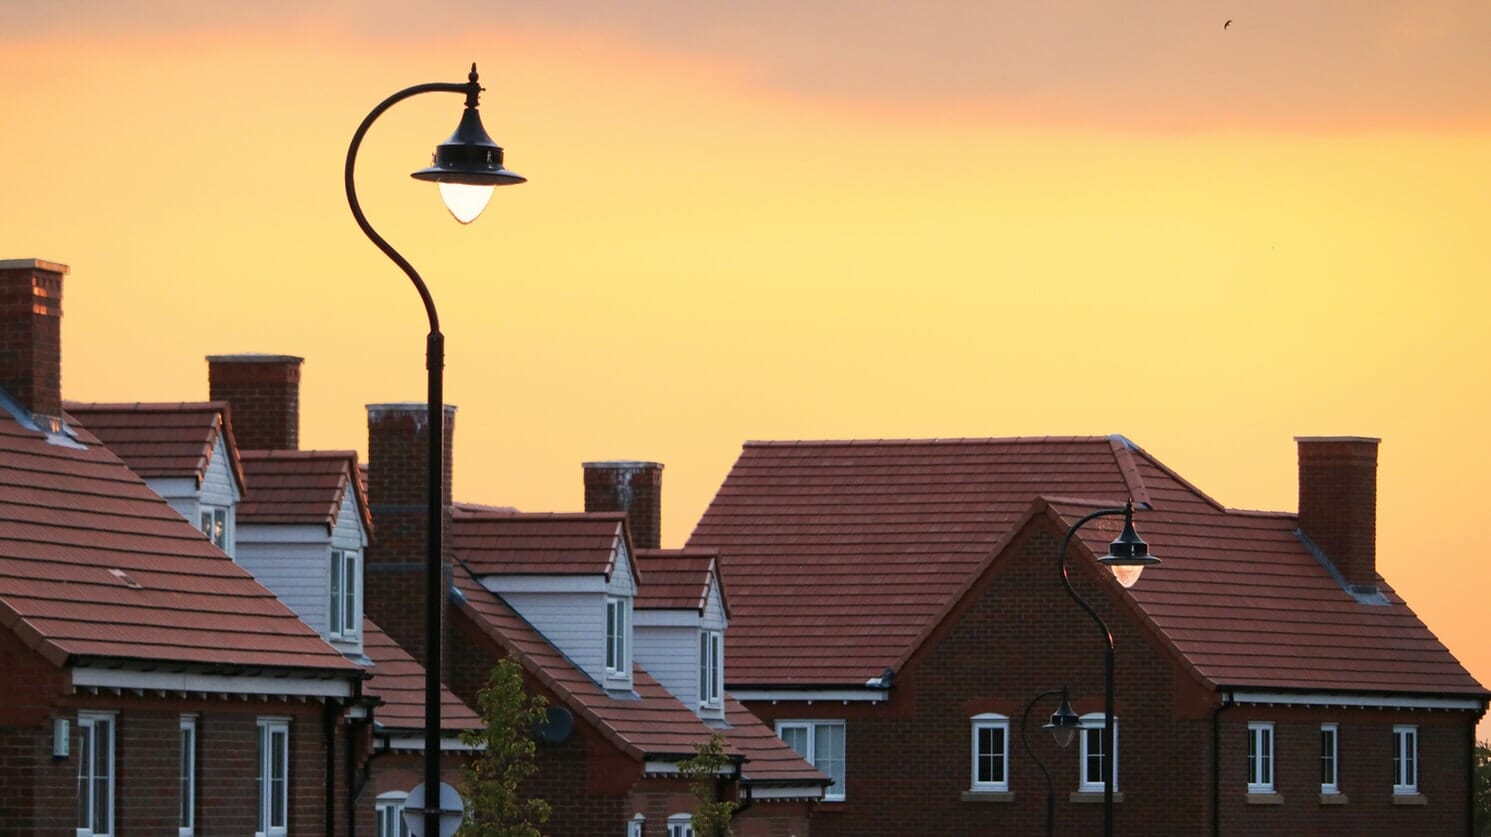 A street light in front of a row of houses.